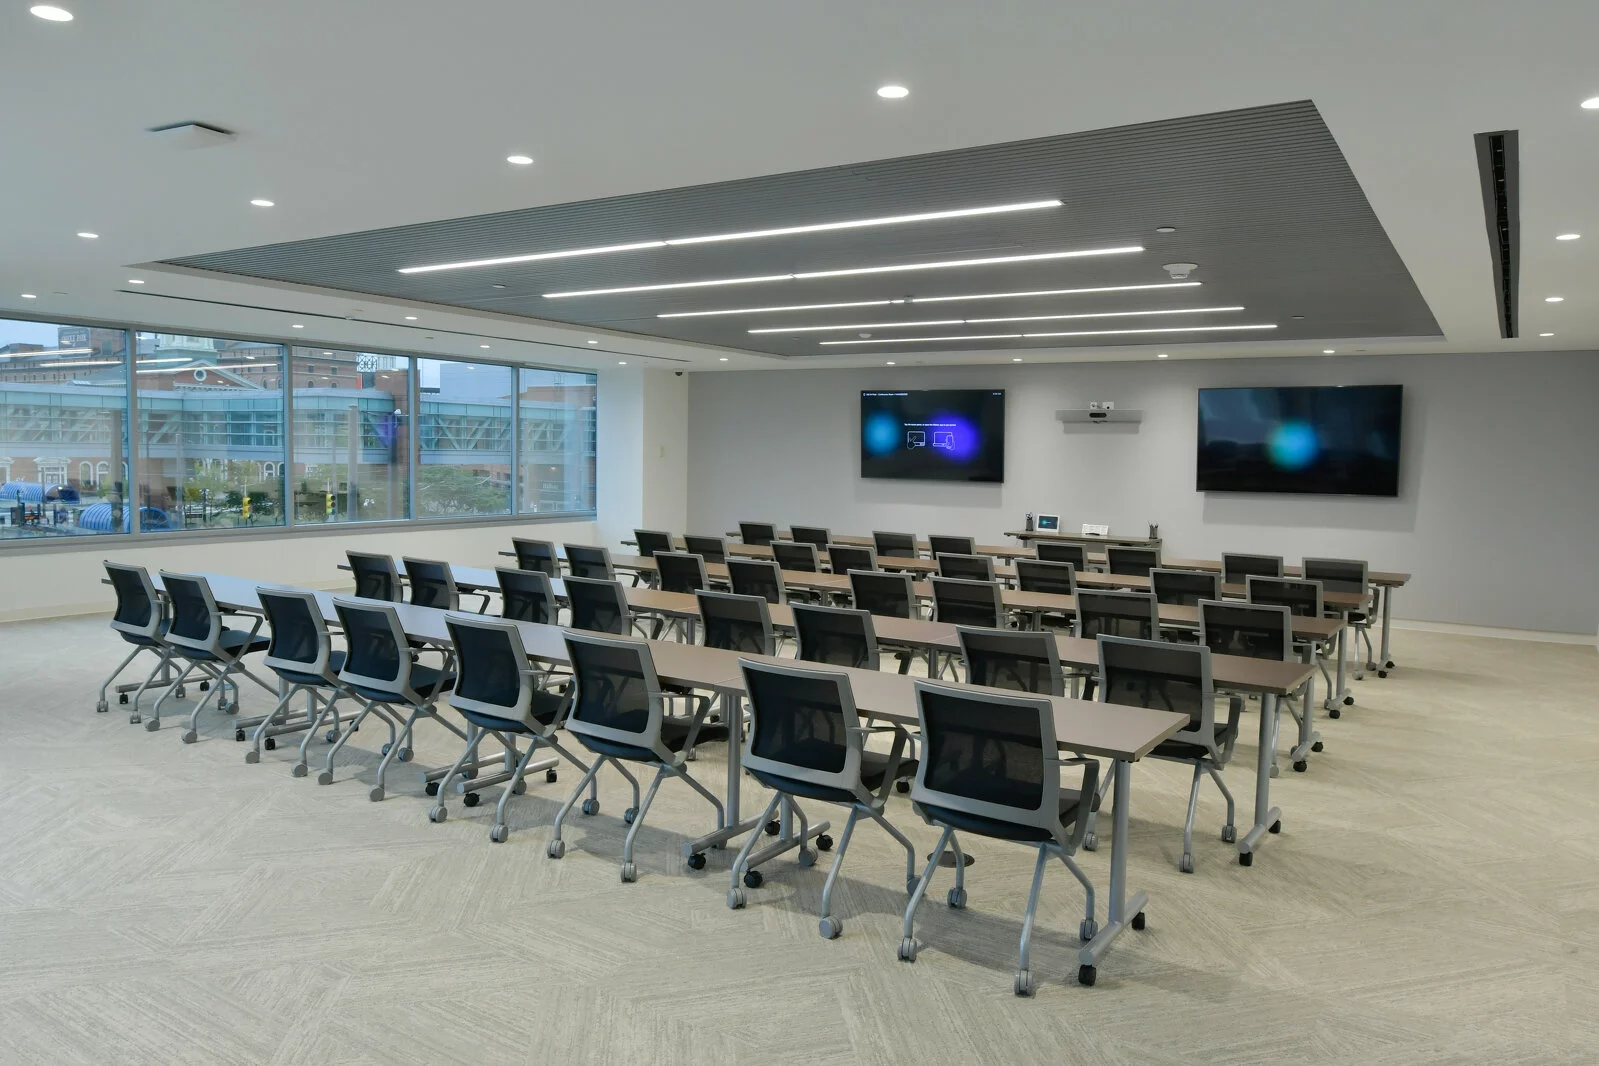 Interior Classroom, 2 tv monitors for presentations, 5 rows of 8 seat desks with computer chairs, carpet floors, large window on left side of the room.